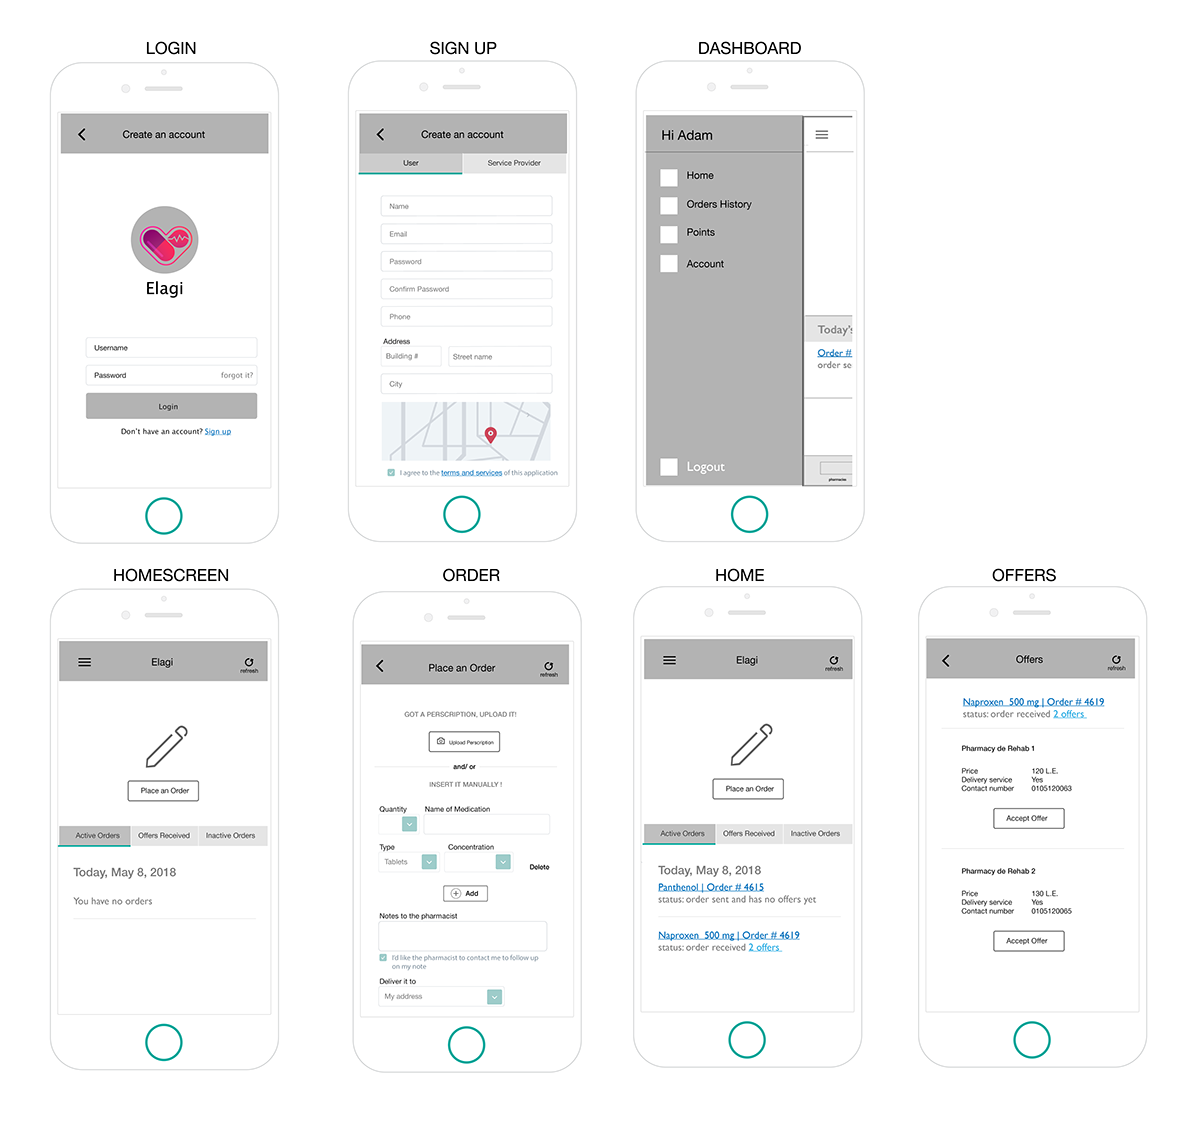 UI ux Case Study health design human centered design design methods user experience User research empathy map wireframe